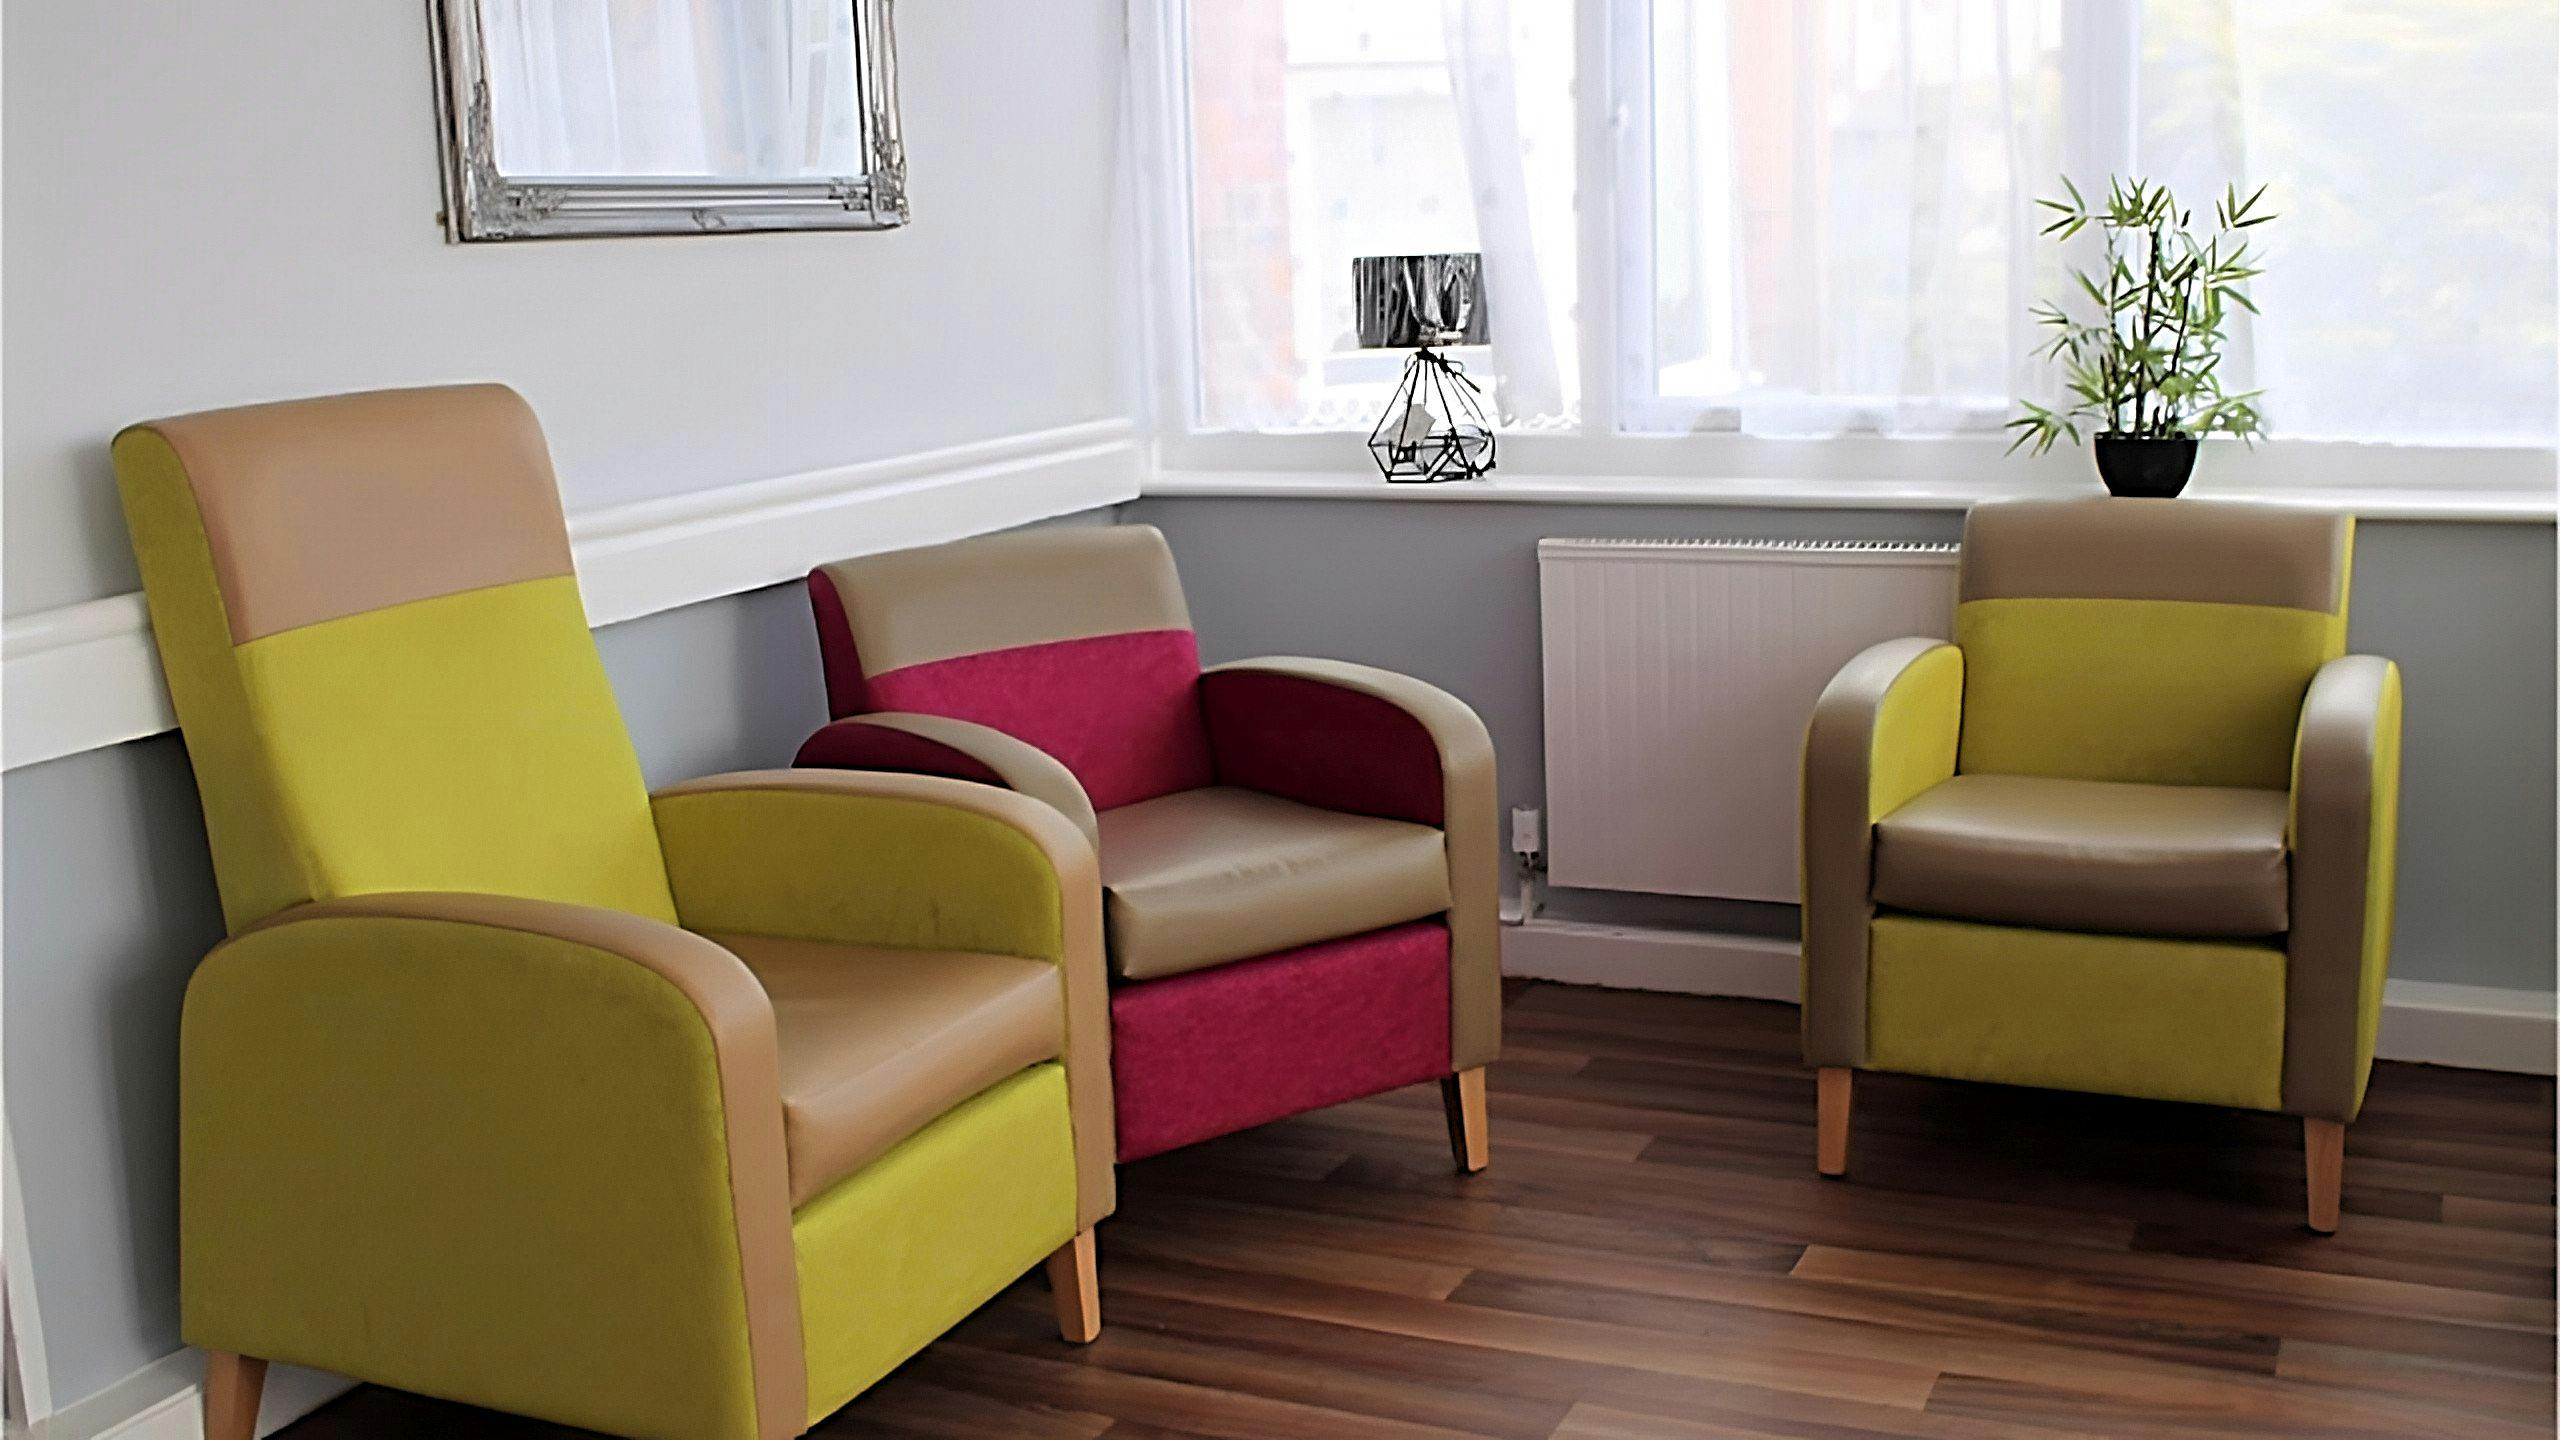 The lounge area at Barnes Court Care Home in Sunderland, Tyne and Wear